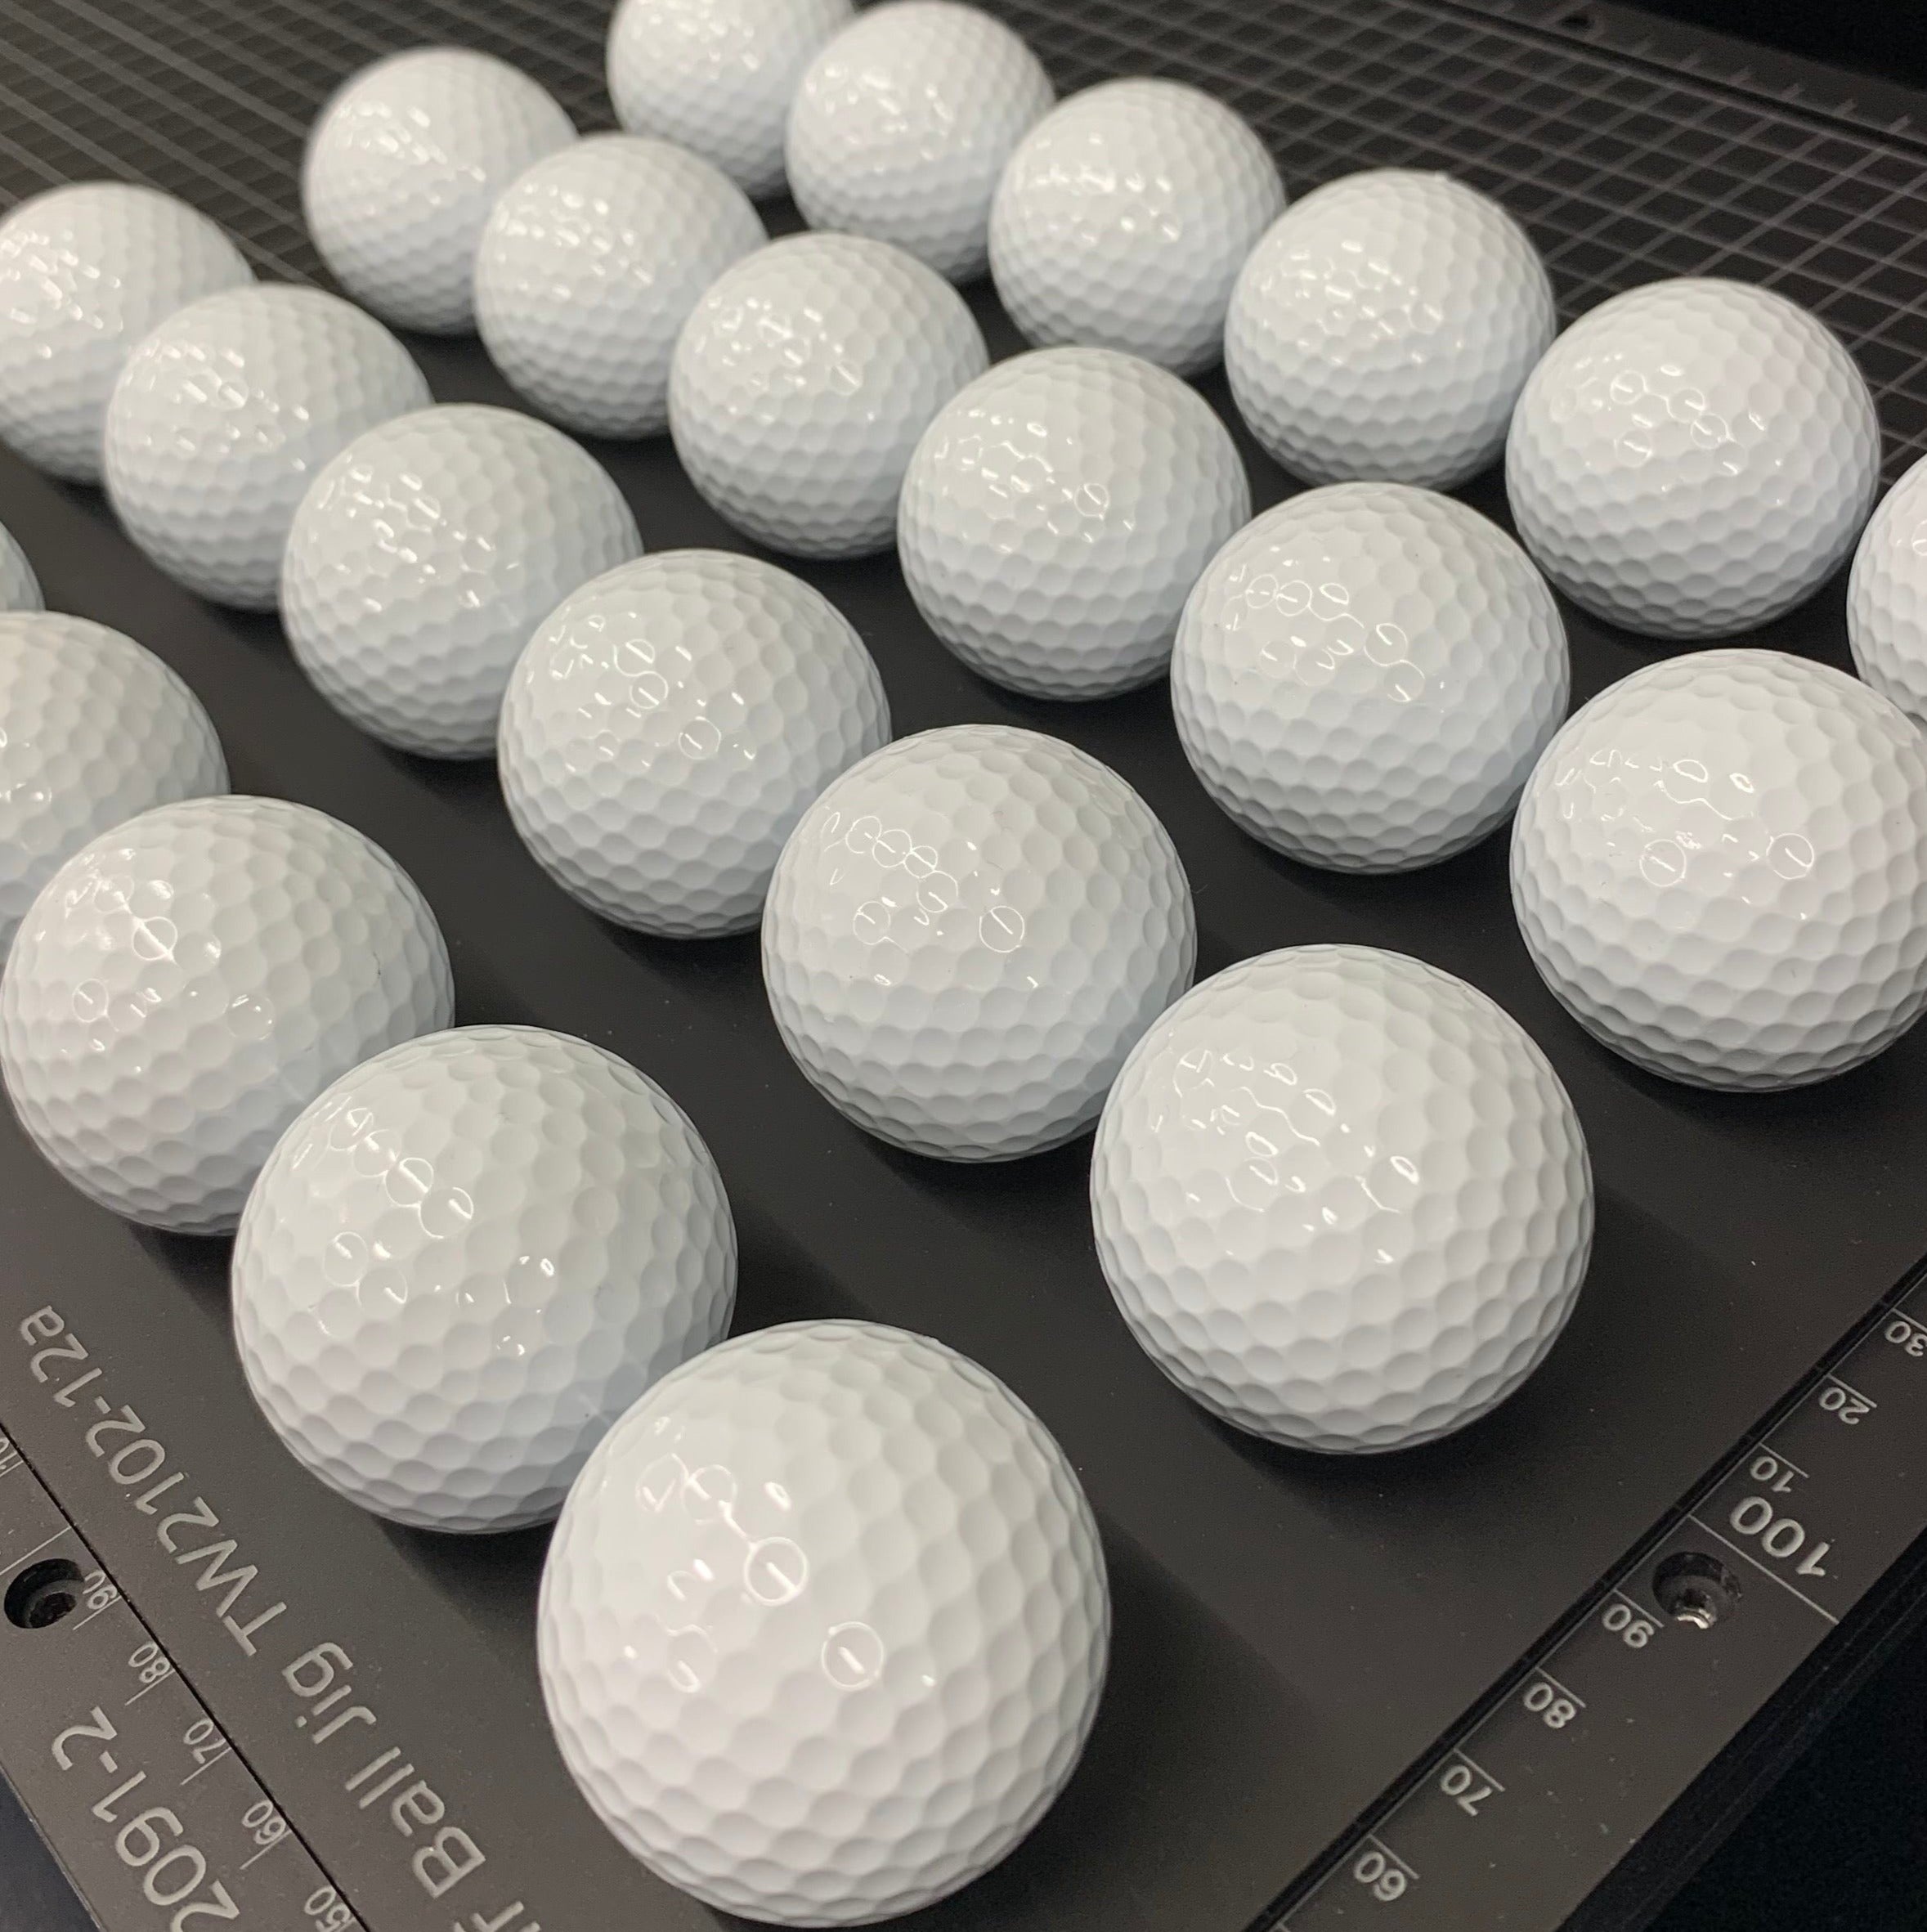 Golf Ball Printing Jig for Large Format Flatbed Printer (216 Spaces)